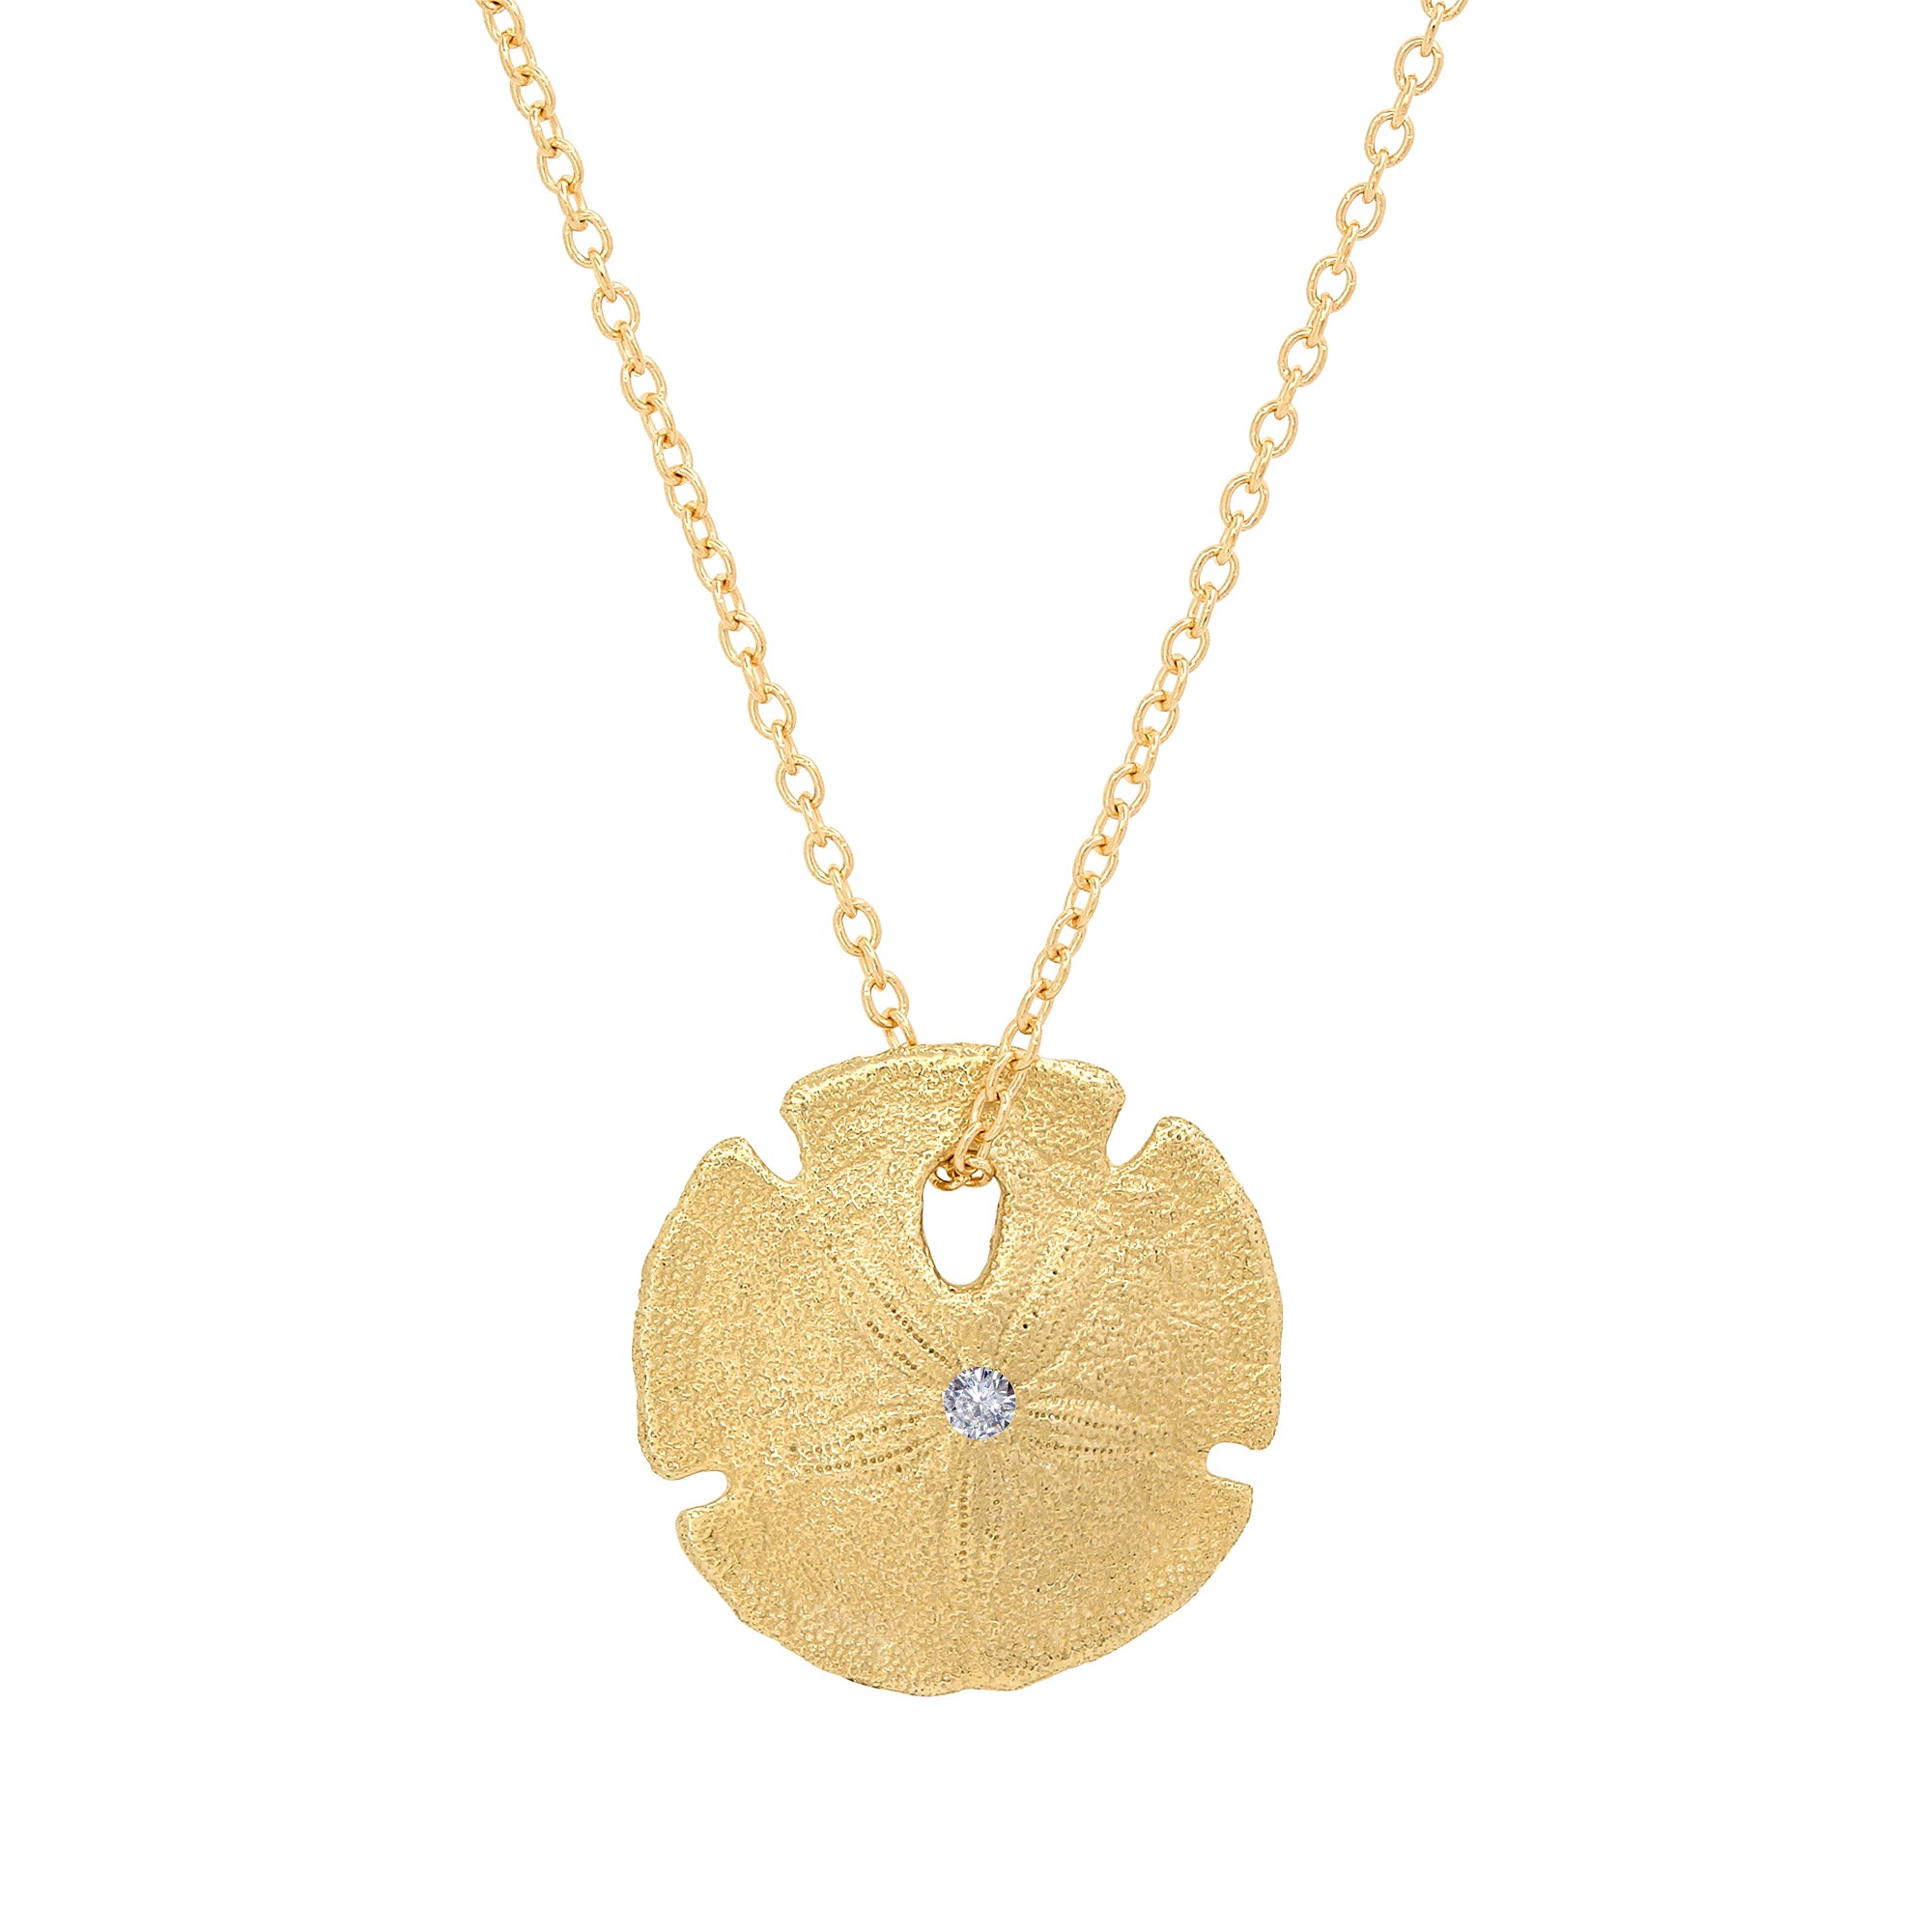 Buy 14K Gold Atlantic Sand Dollar on a 14K Gold Chain Online in India - Etsy